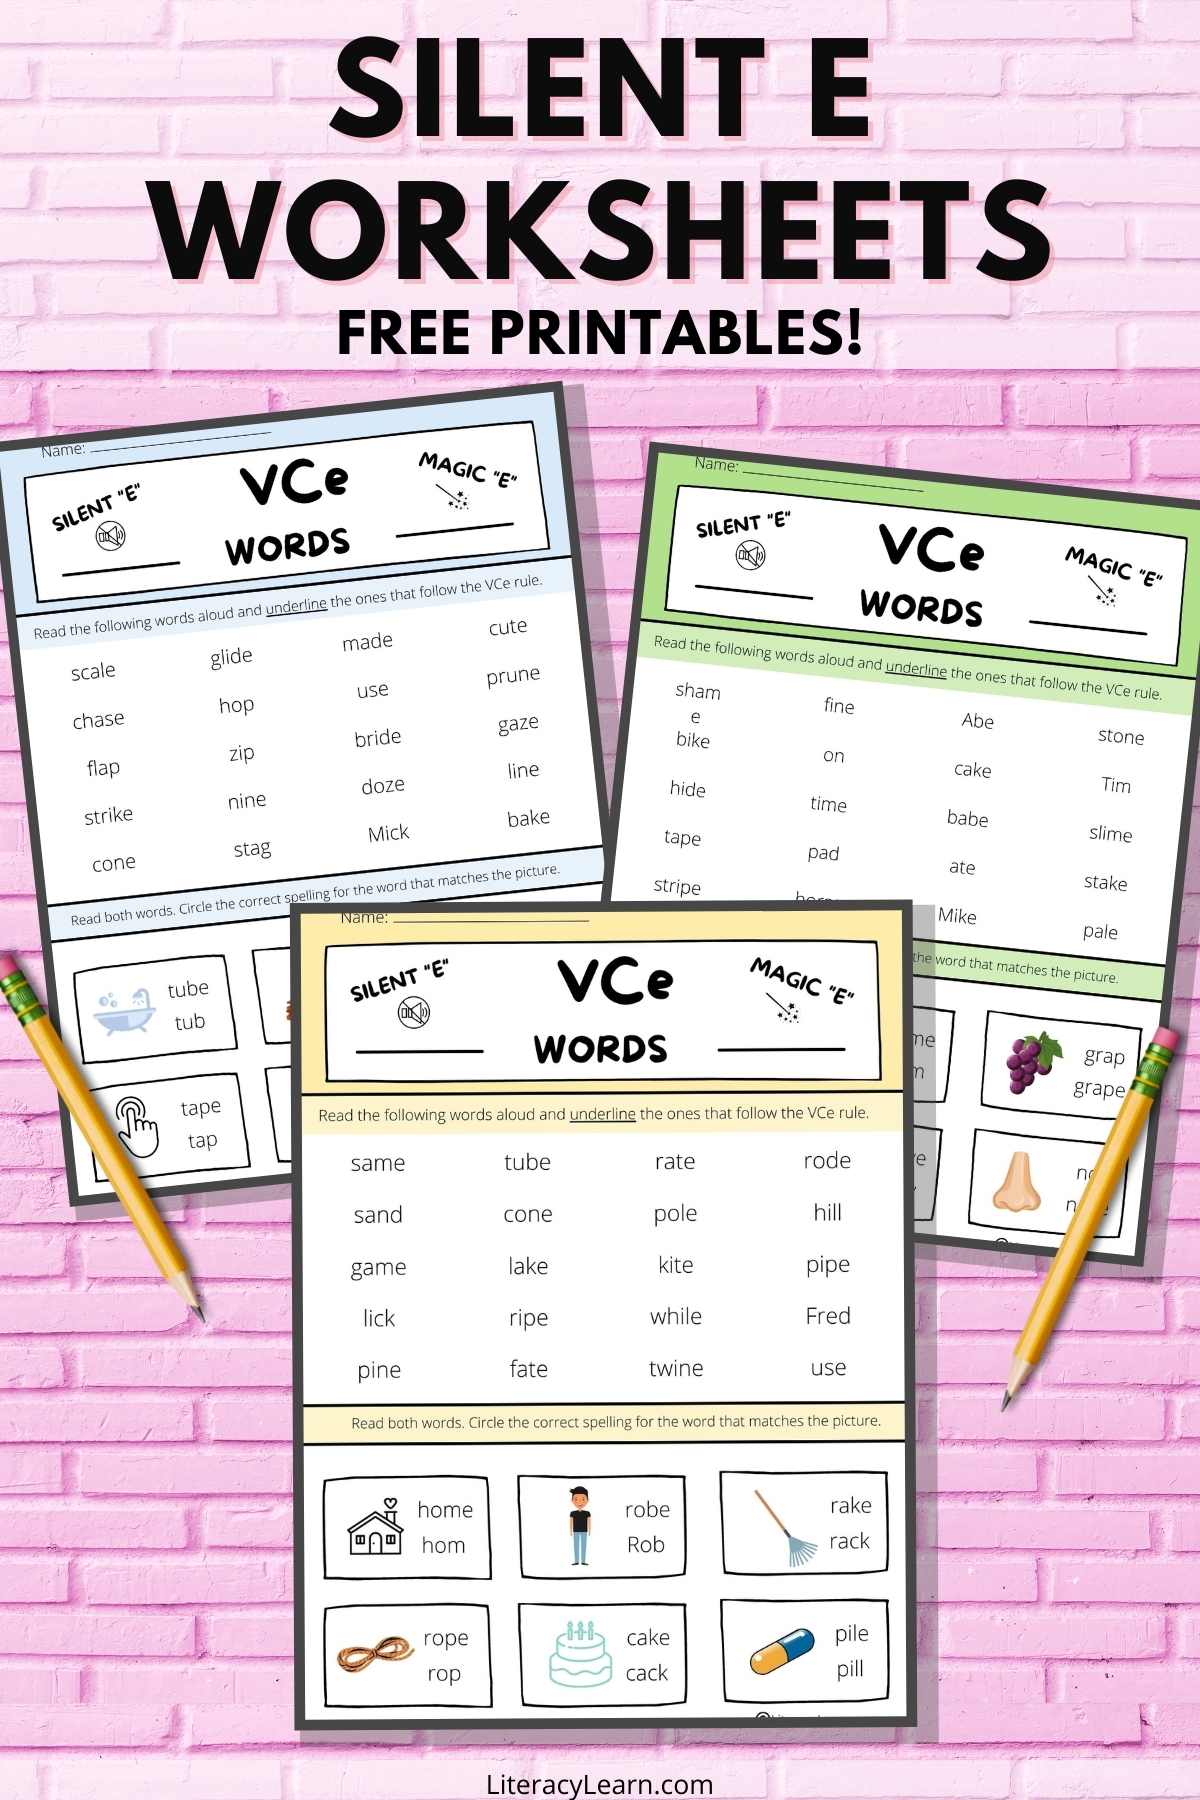 Graphic with silent e worksheets on a pink brick background.